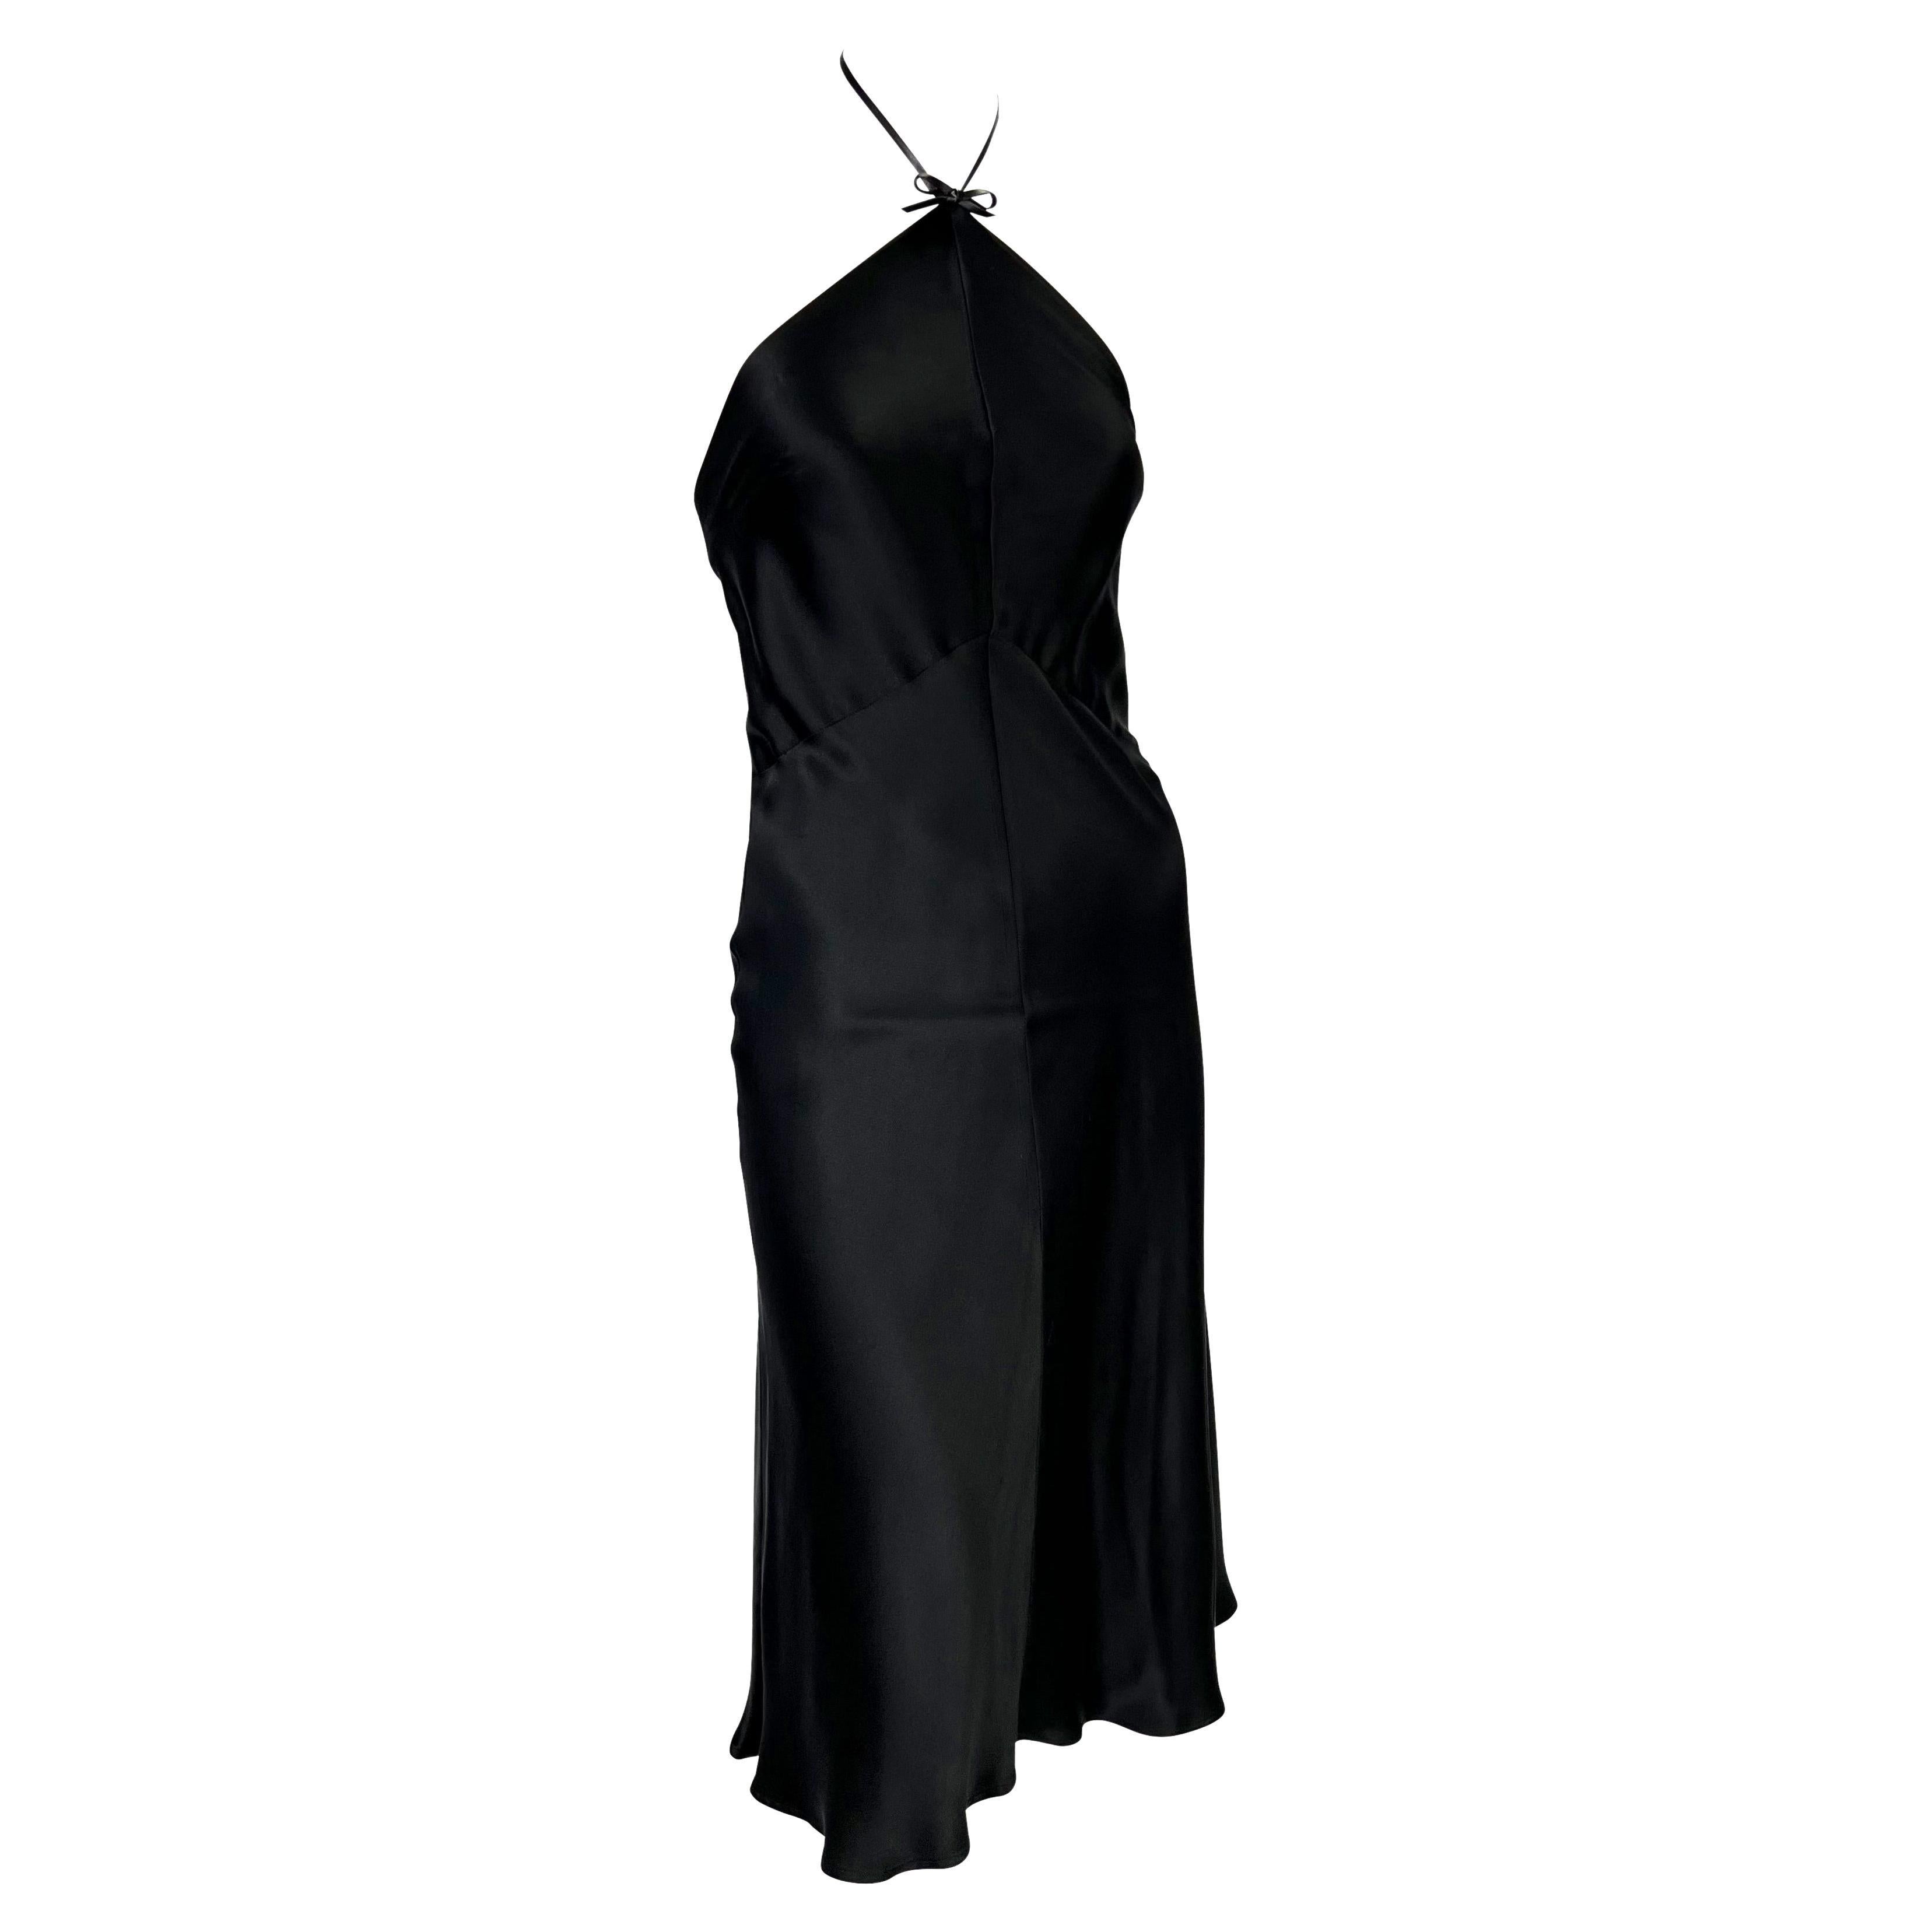 S/S 2000 Gucci by Tom Ford Black Silk Satin Leather Bow Halter Flare Dress 3